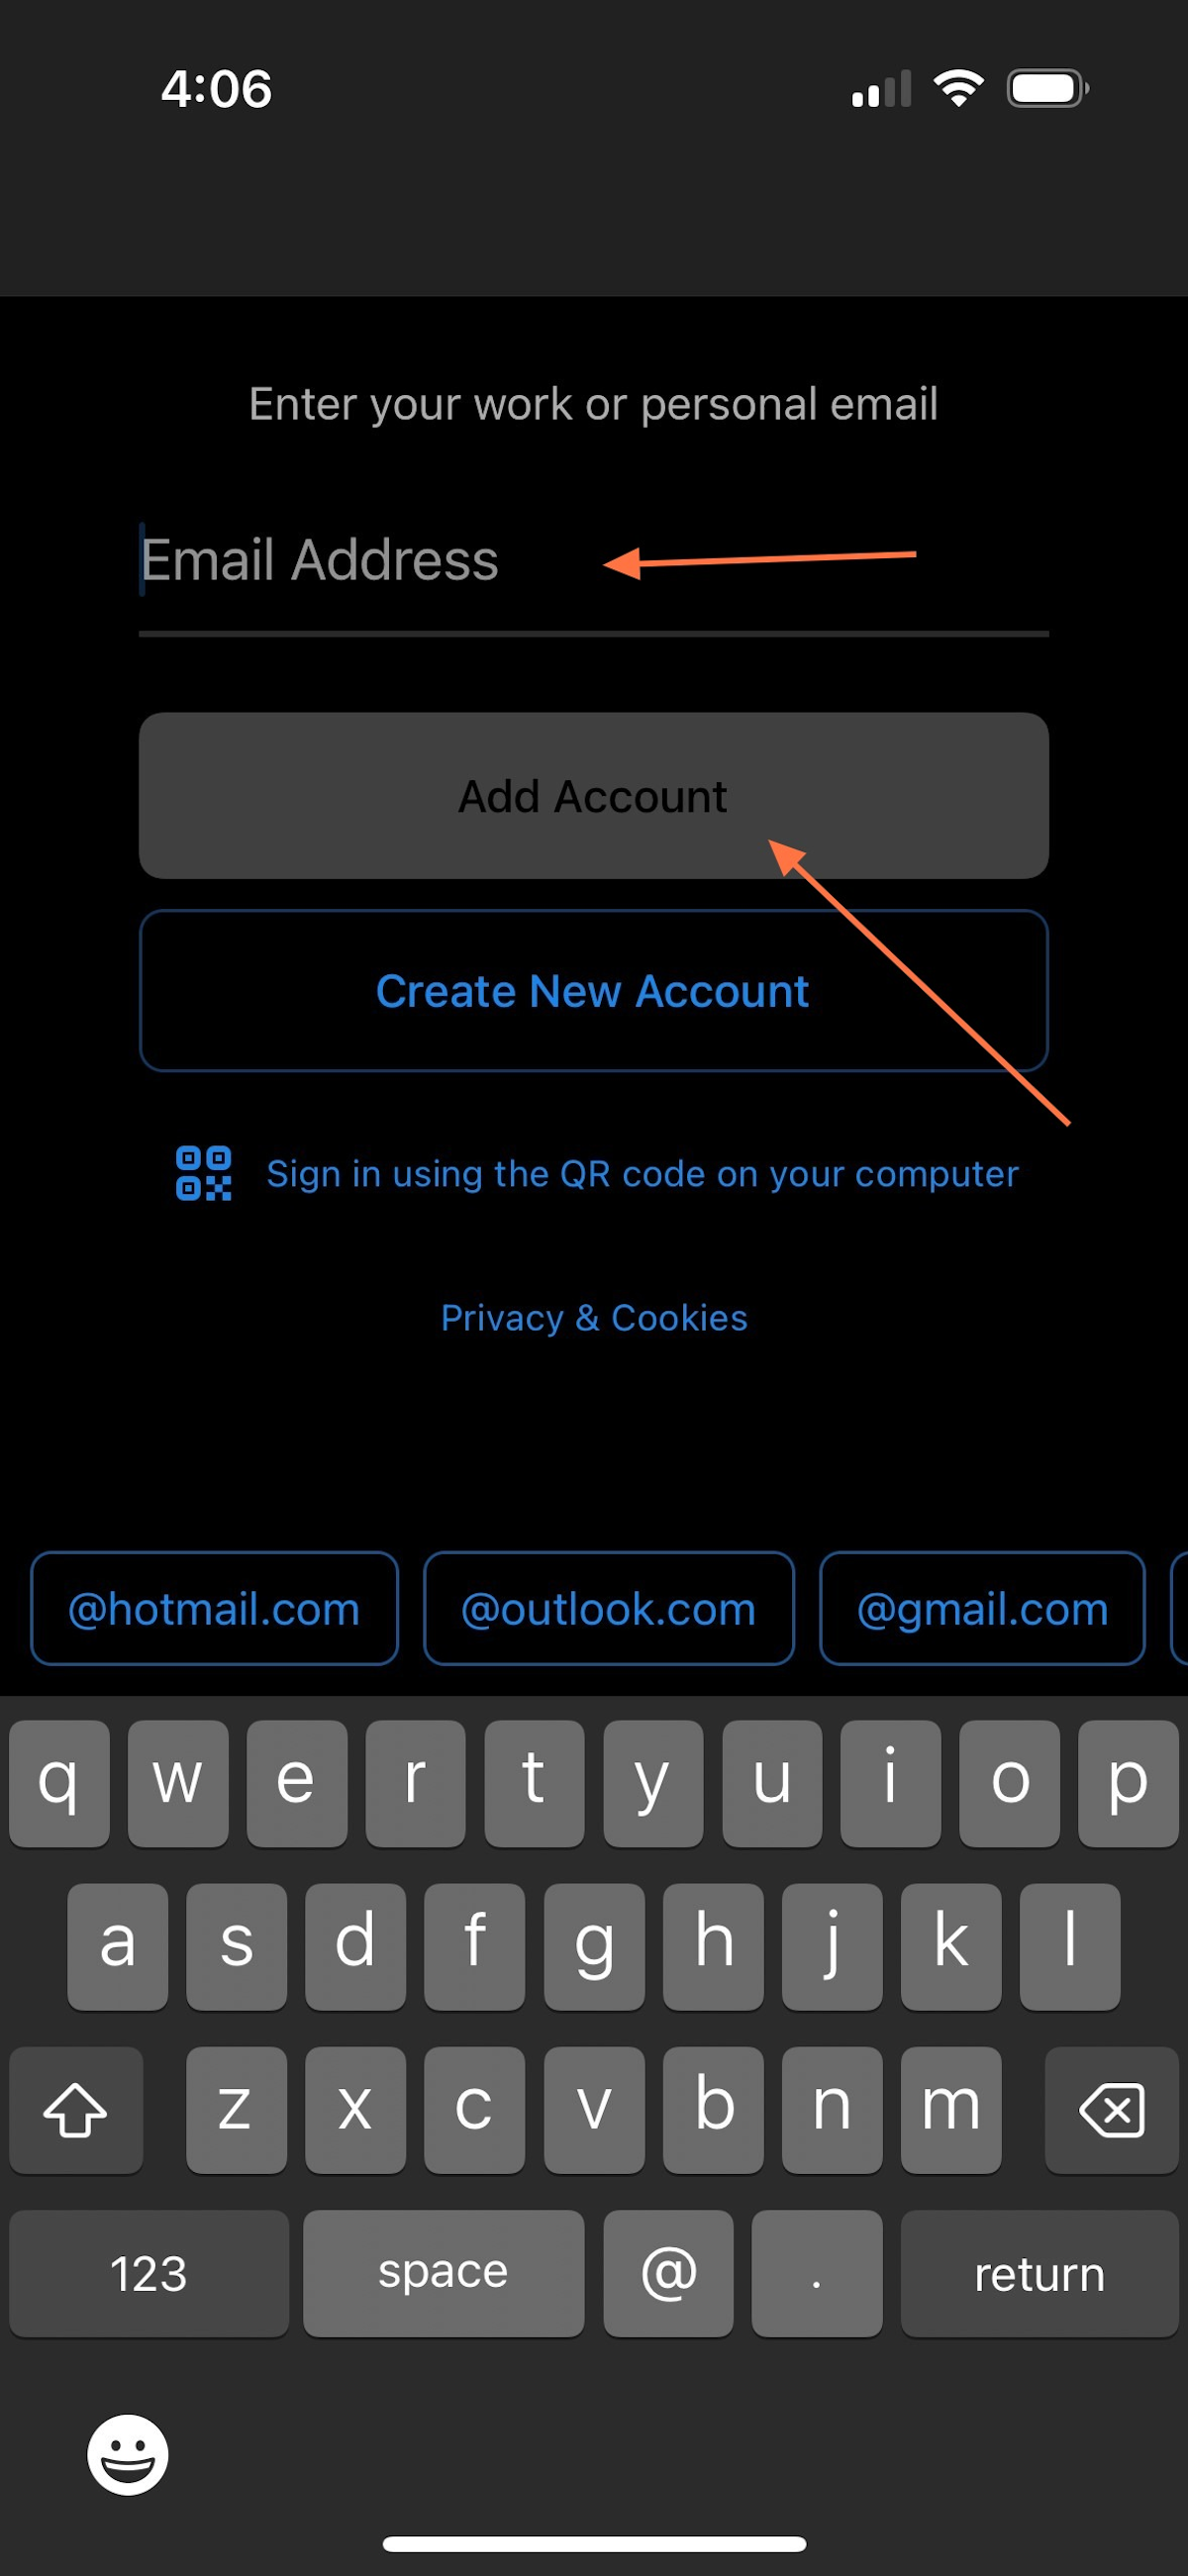 Put your SLCC email address in the blank that says Email Address and hit Add Account